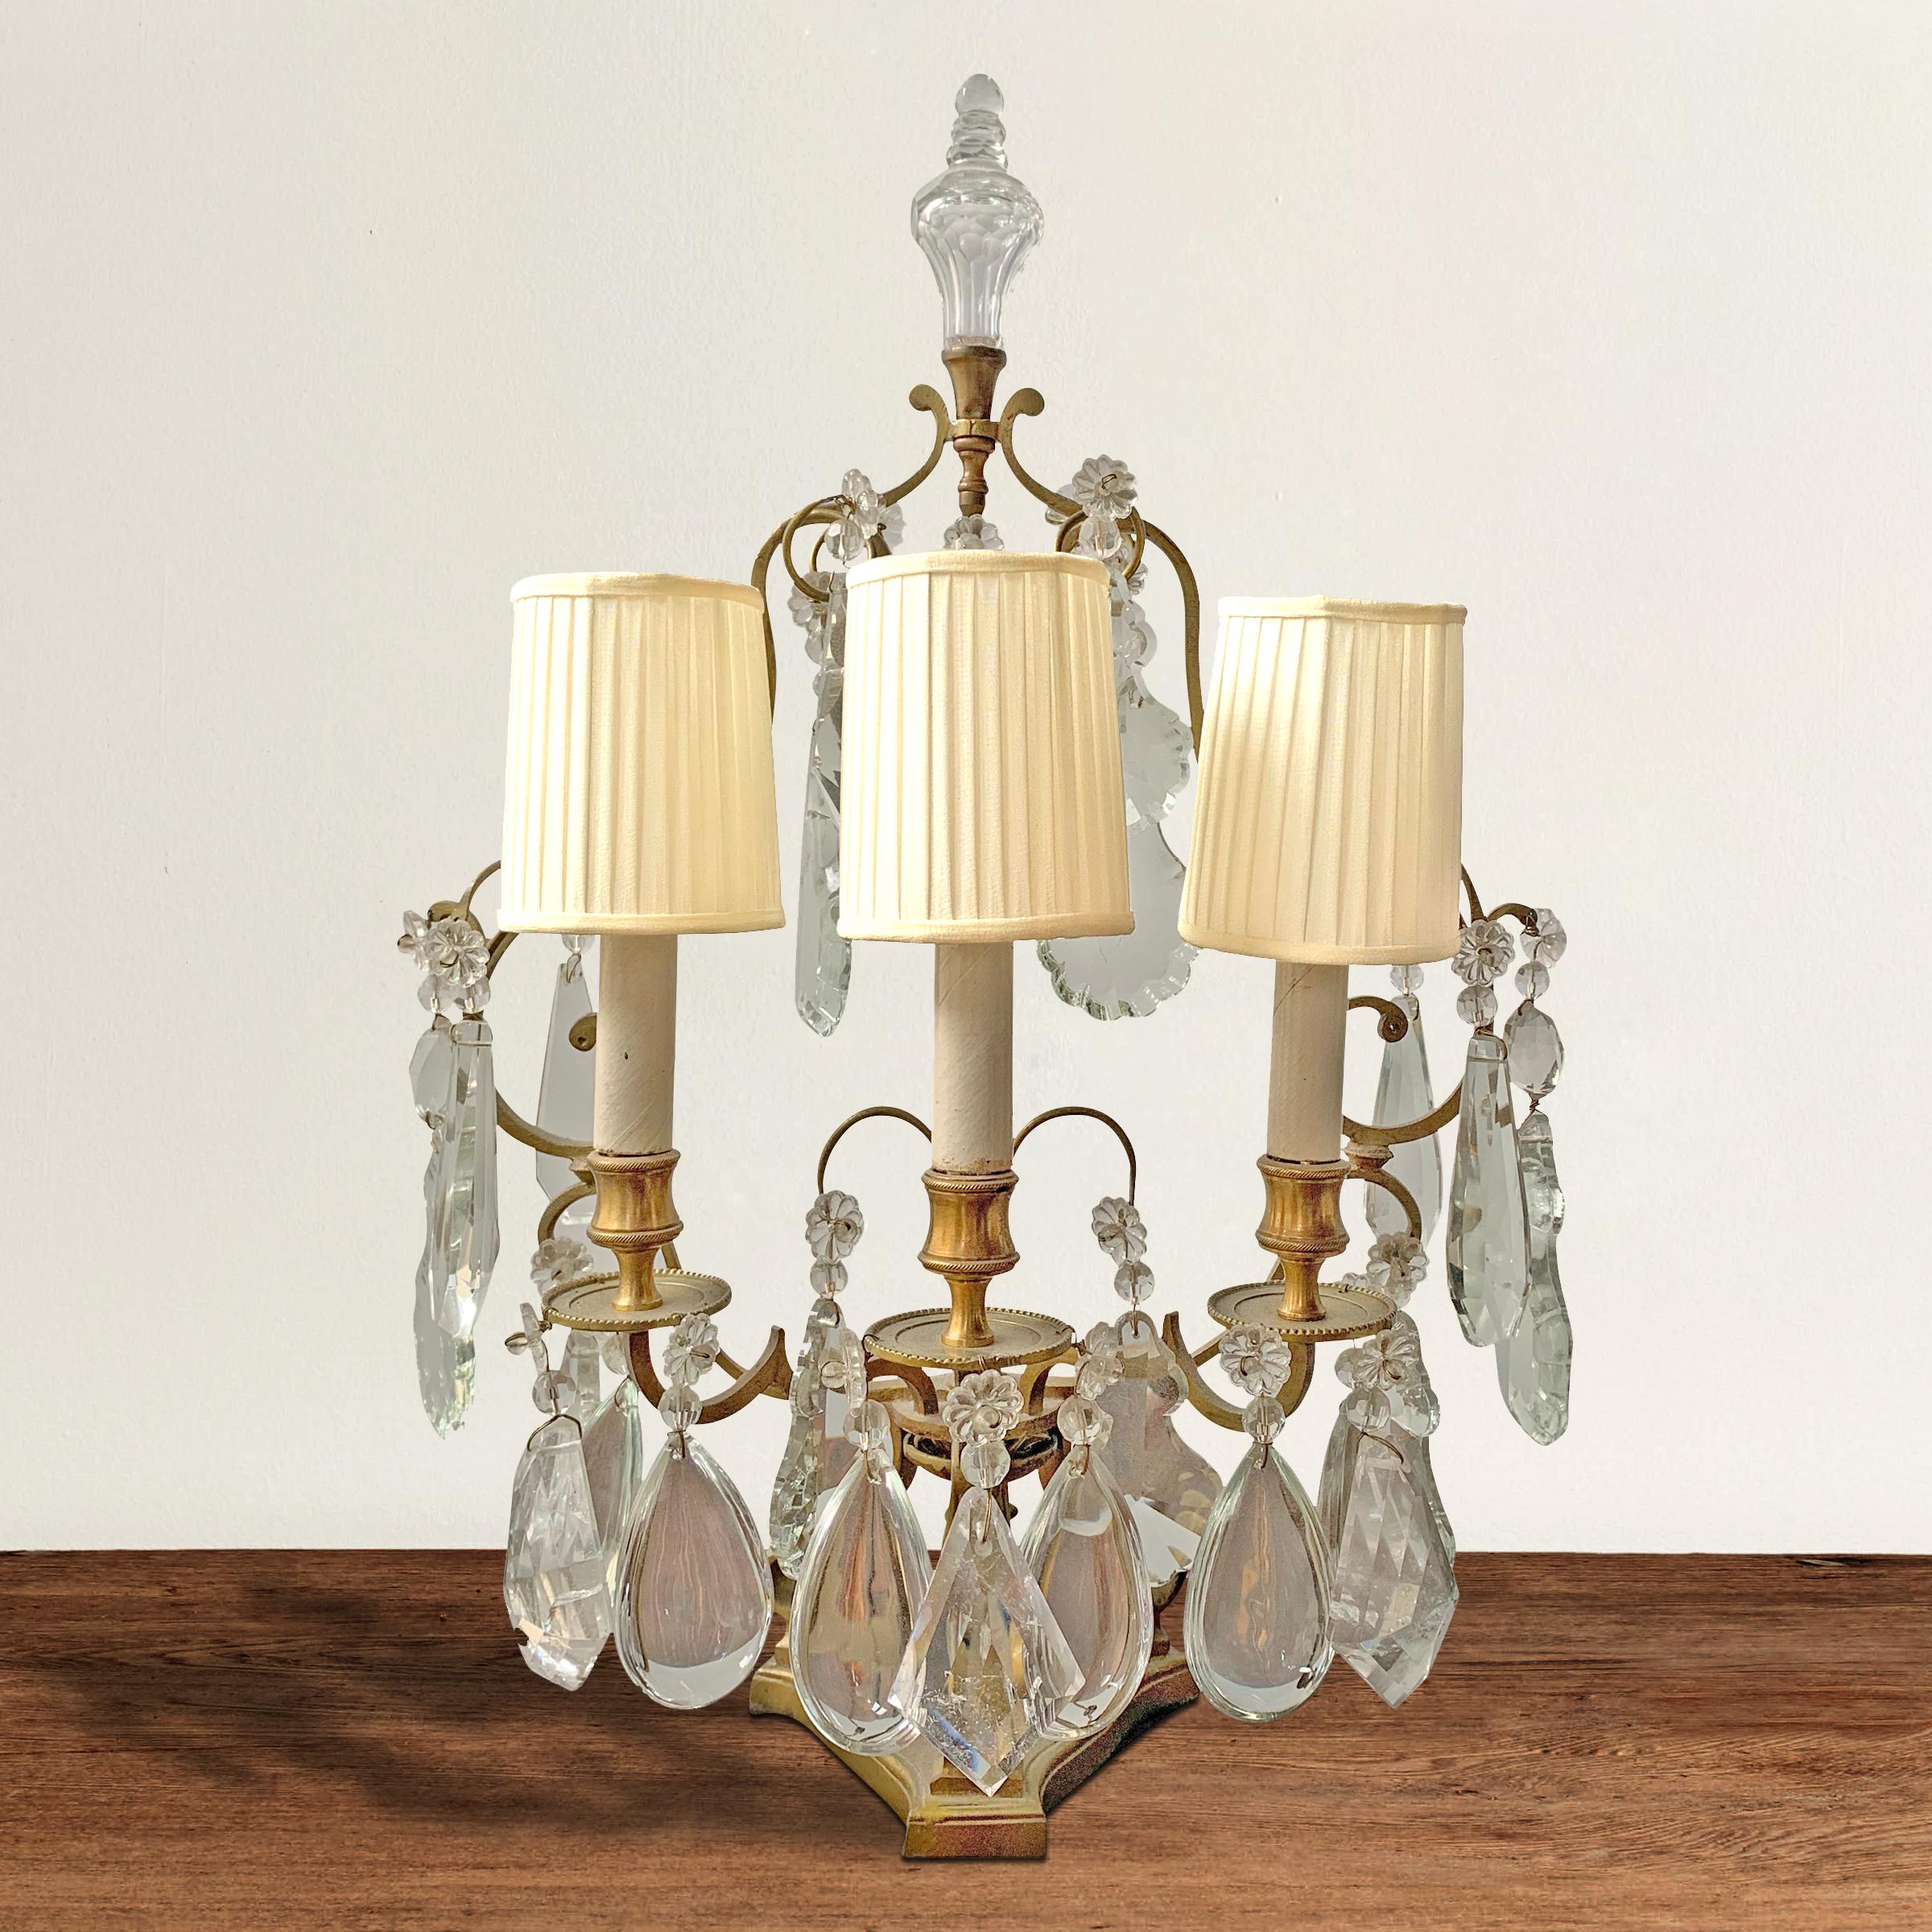 A wonderful early 20th century French gilt bronze three-light girandole with pleated silk shades, and dripping with handcut rock crystal and man-made crystal pendalogues. Fixture is three sided, and designed to be placed against near or against a